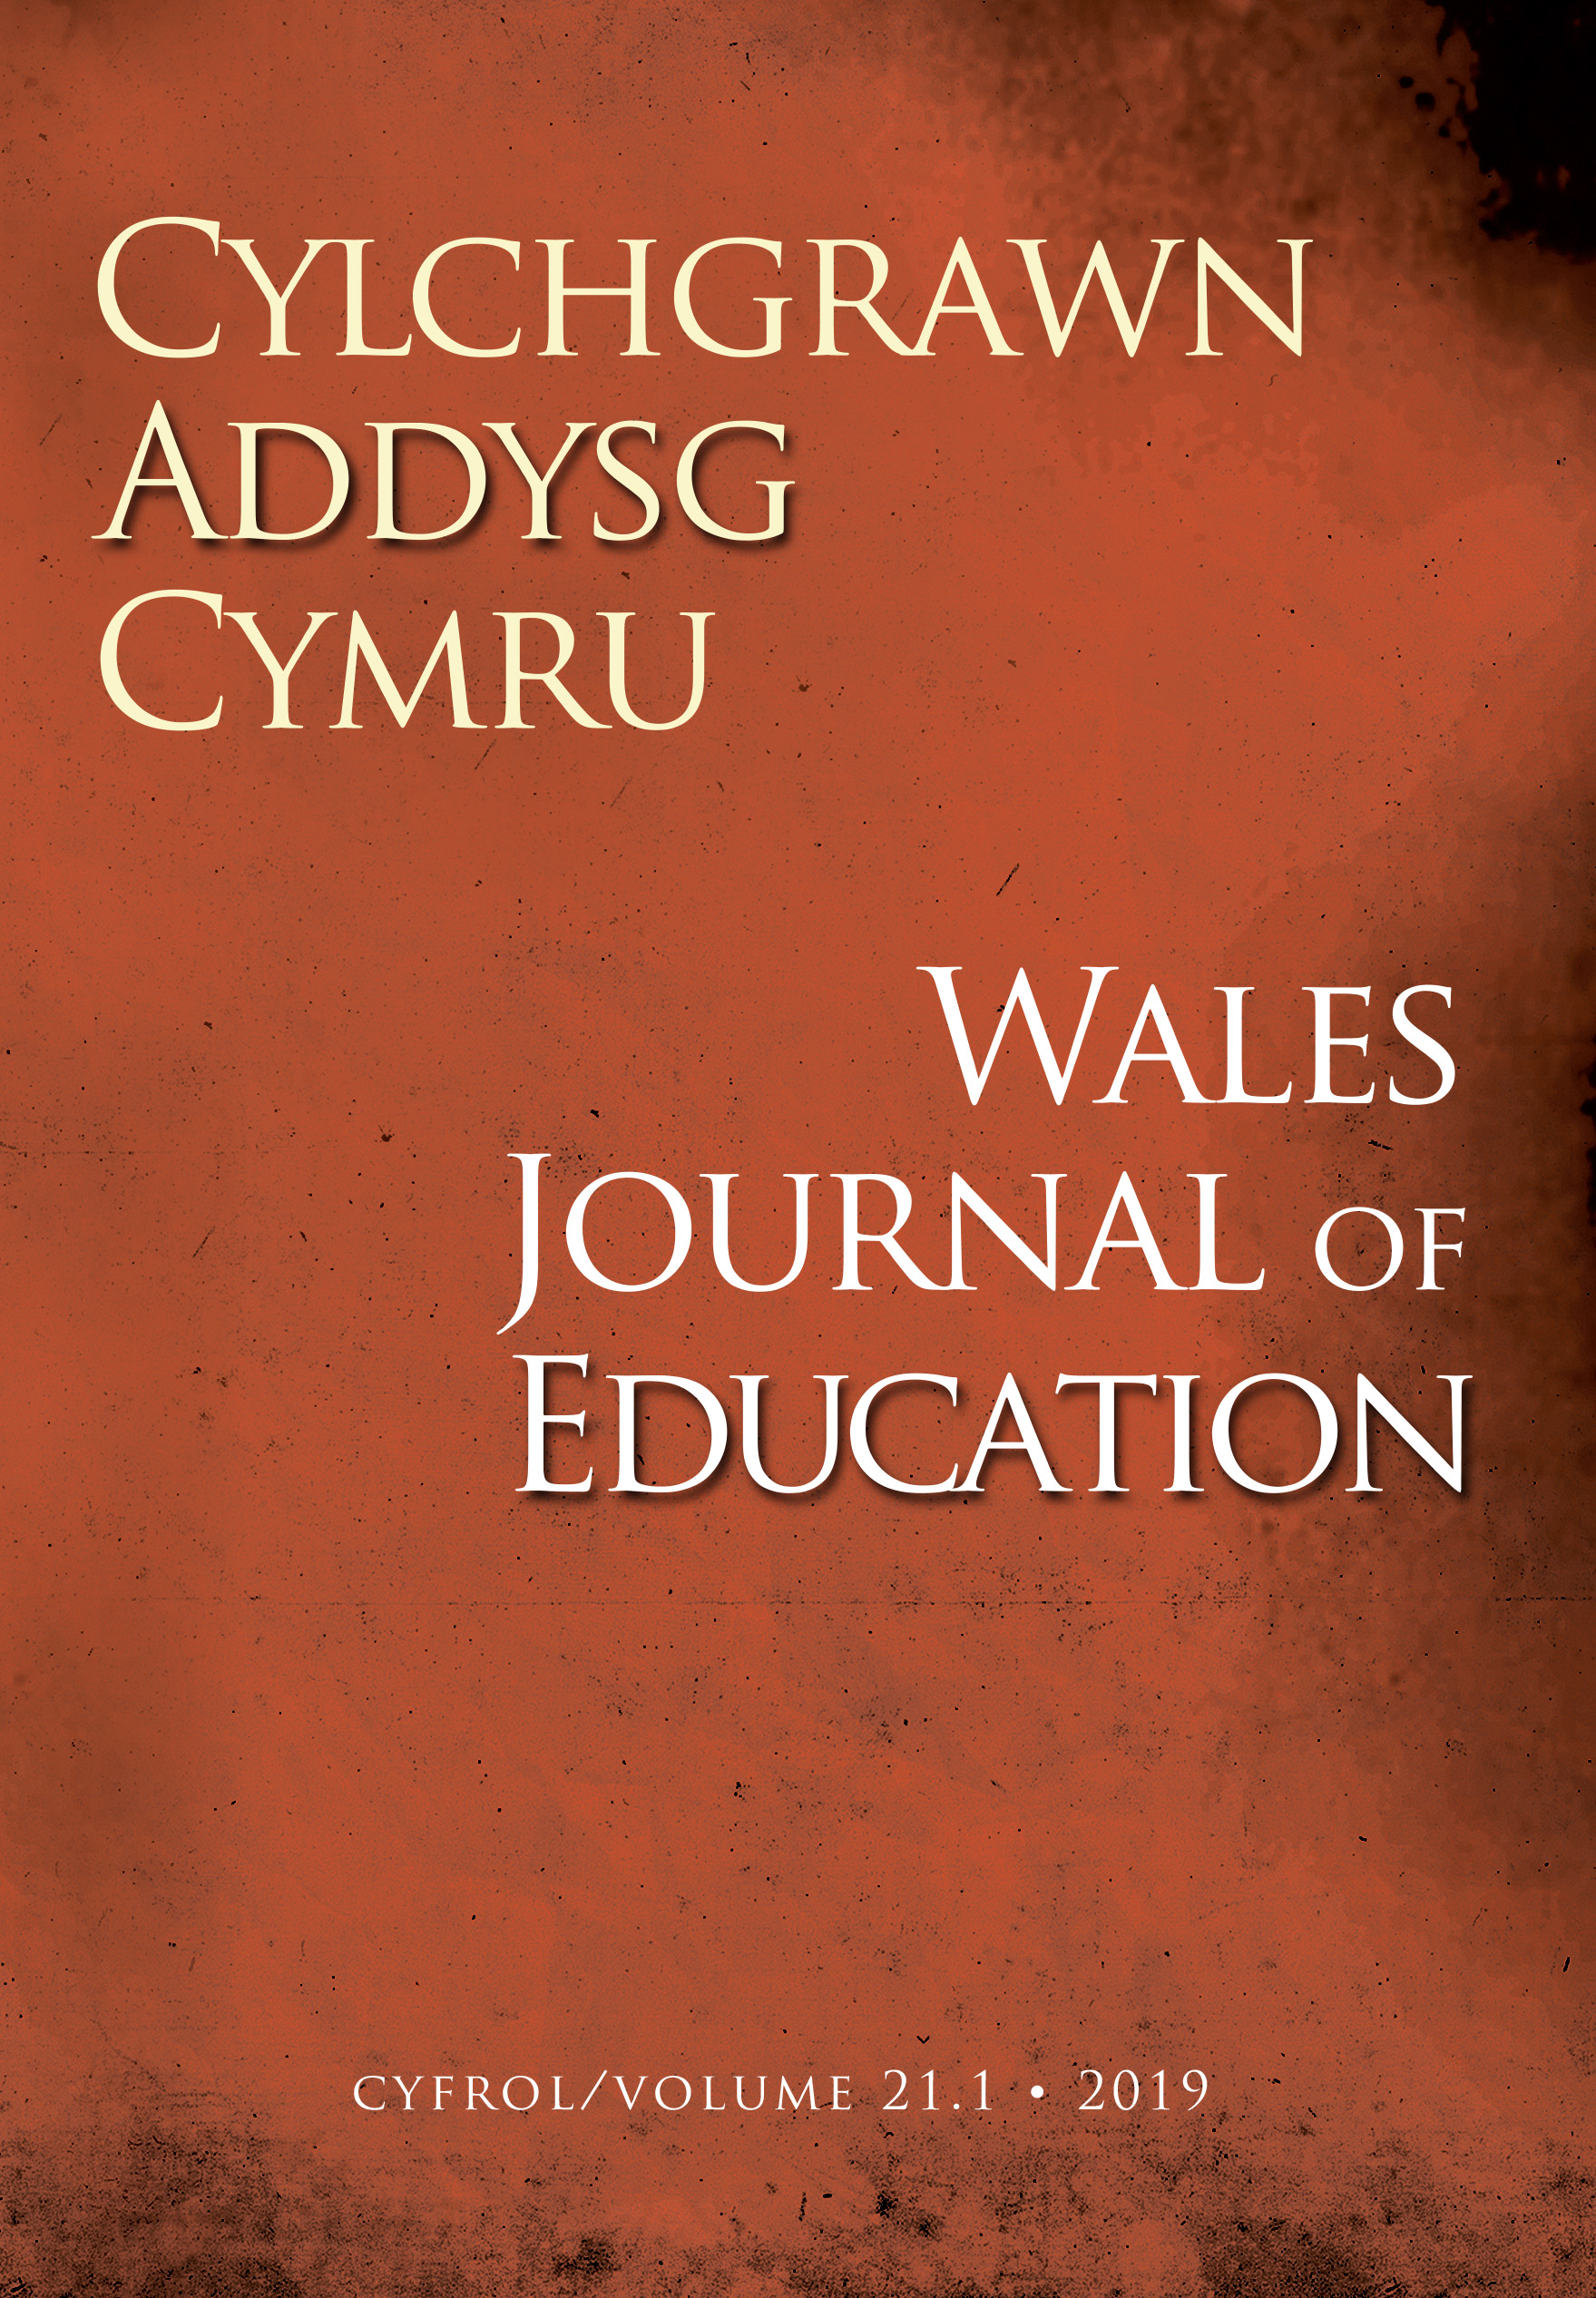 Wales Journal of Education